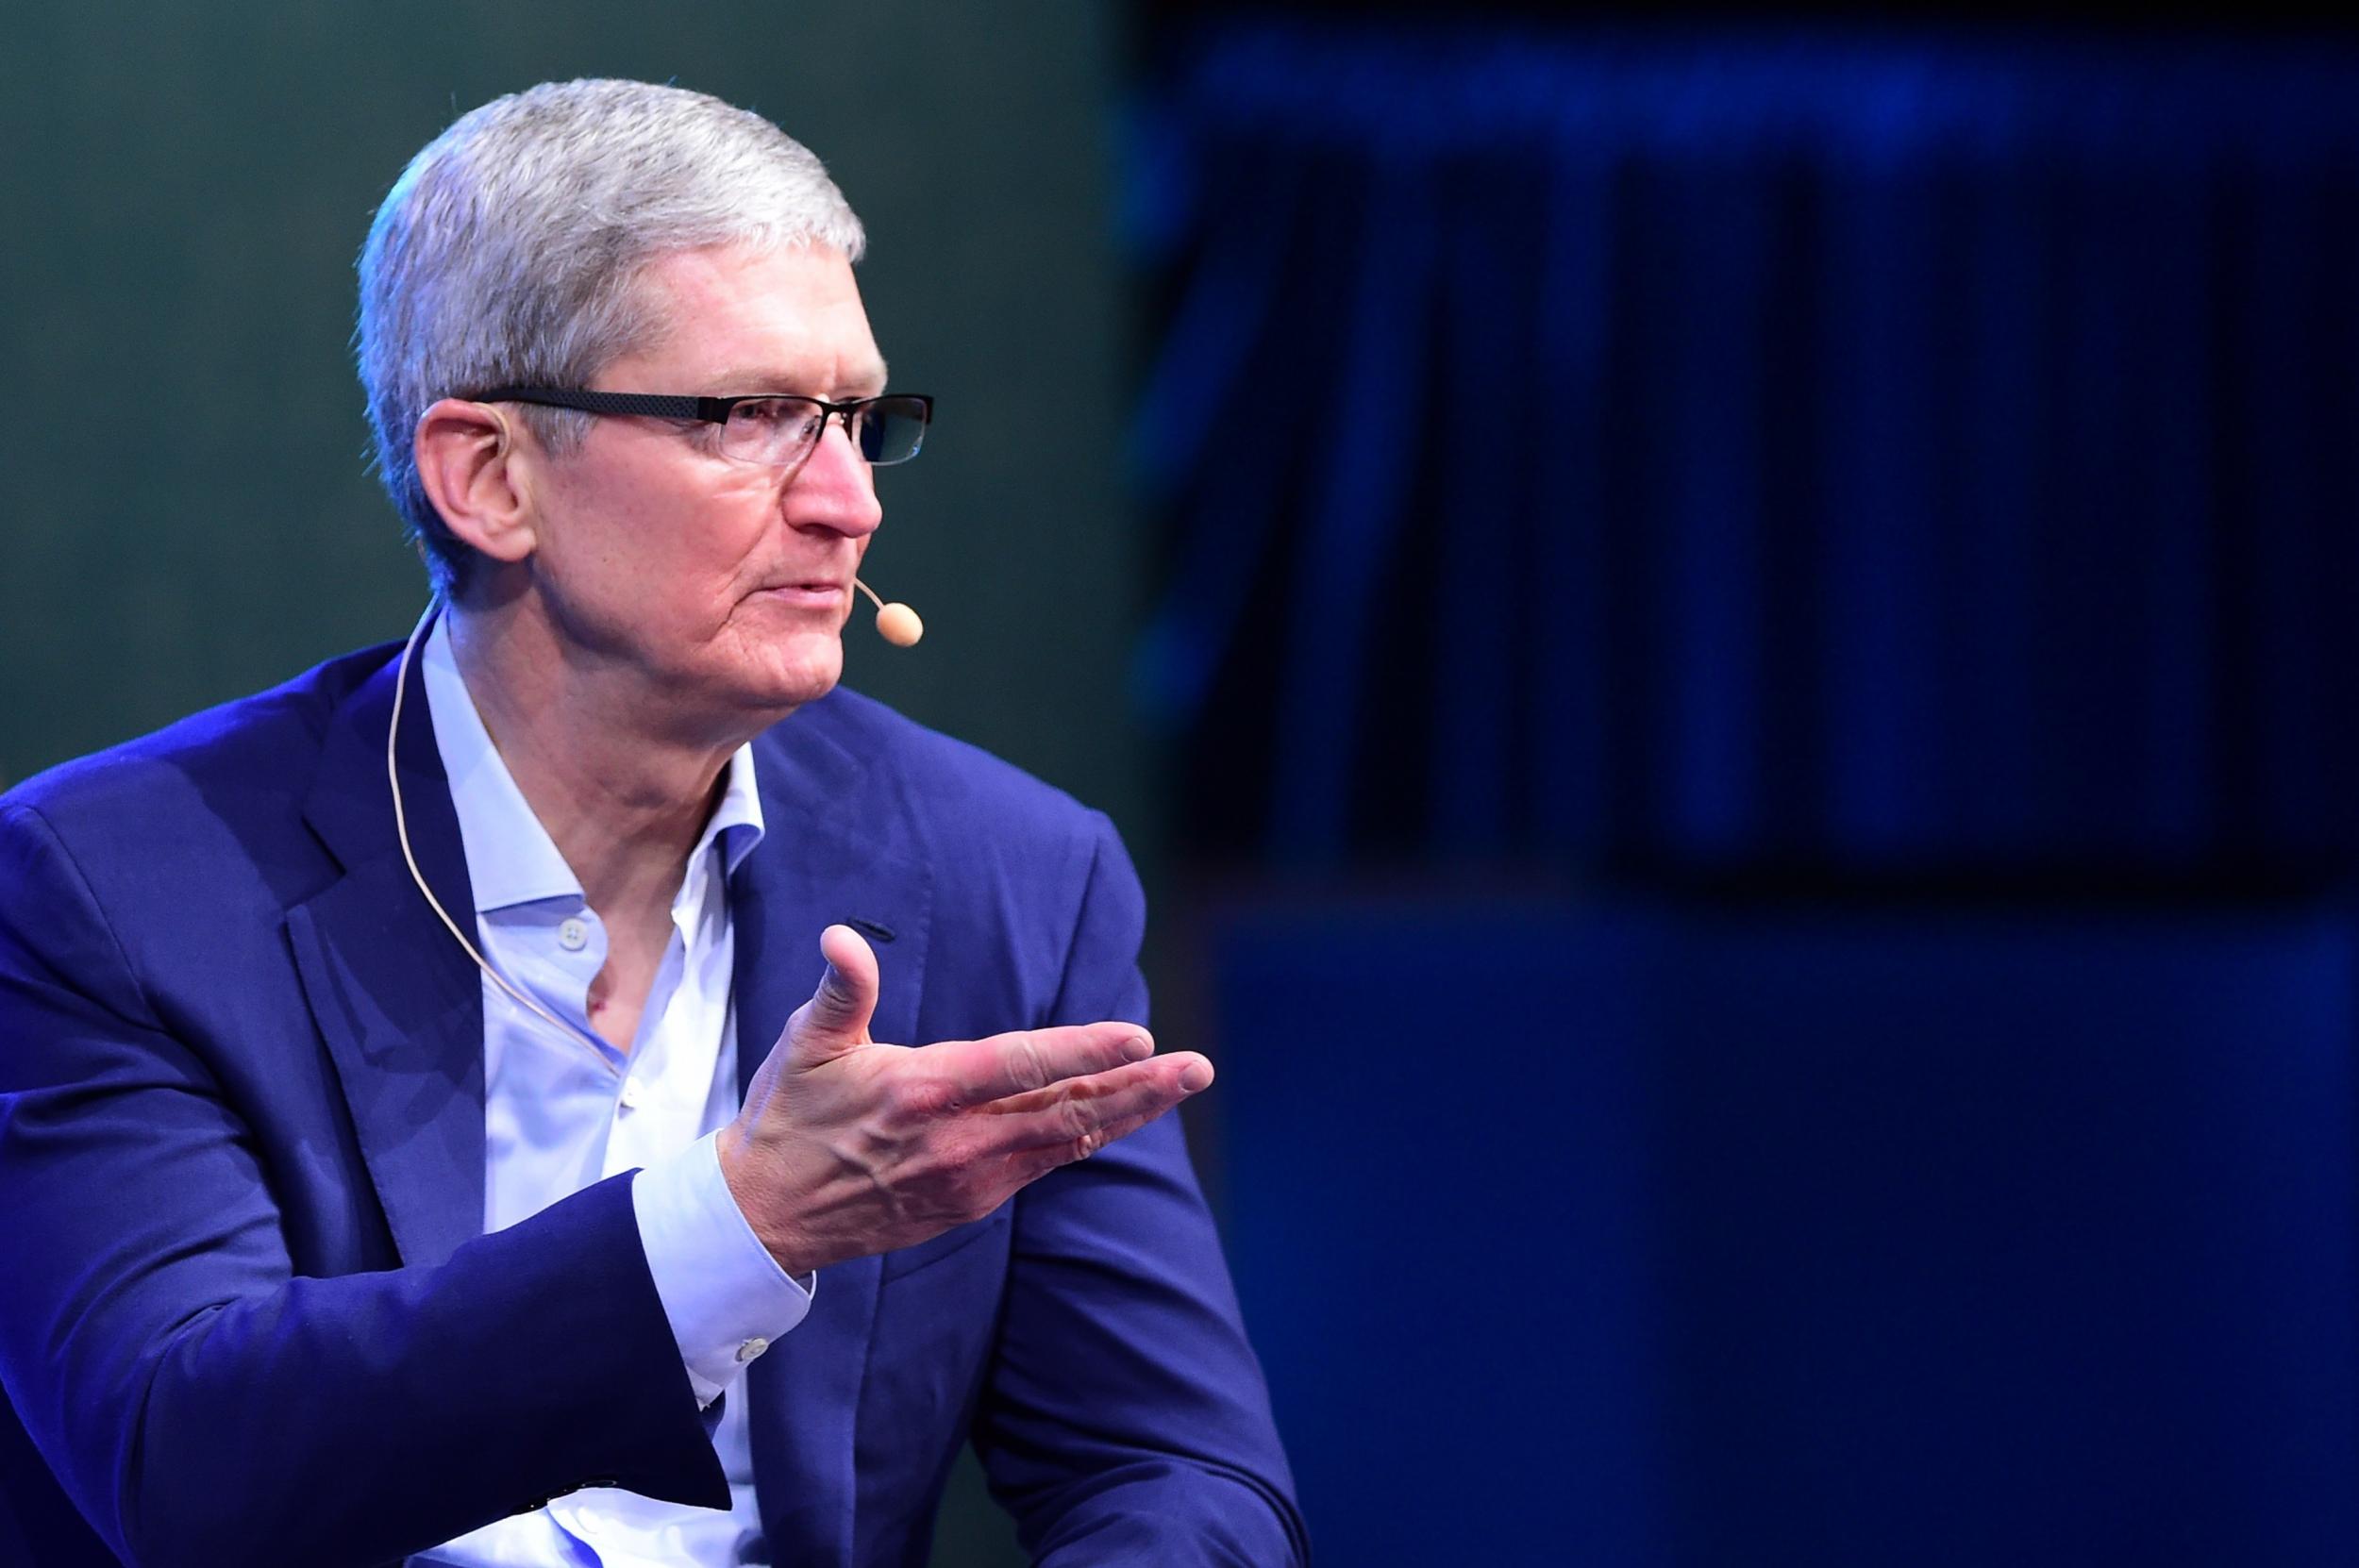 Apple CEO Tim Cook speaks at the WSJD conference in California